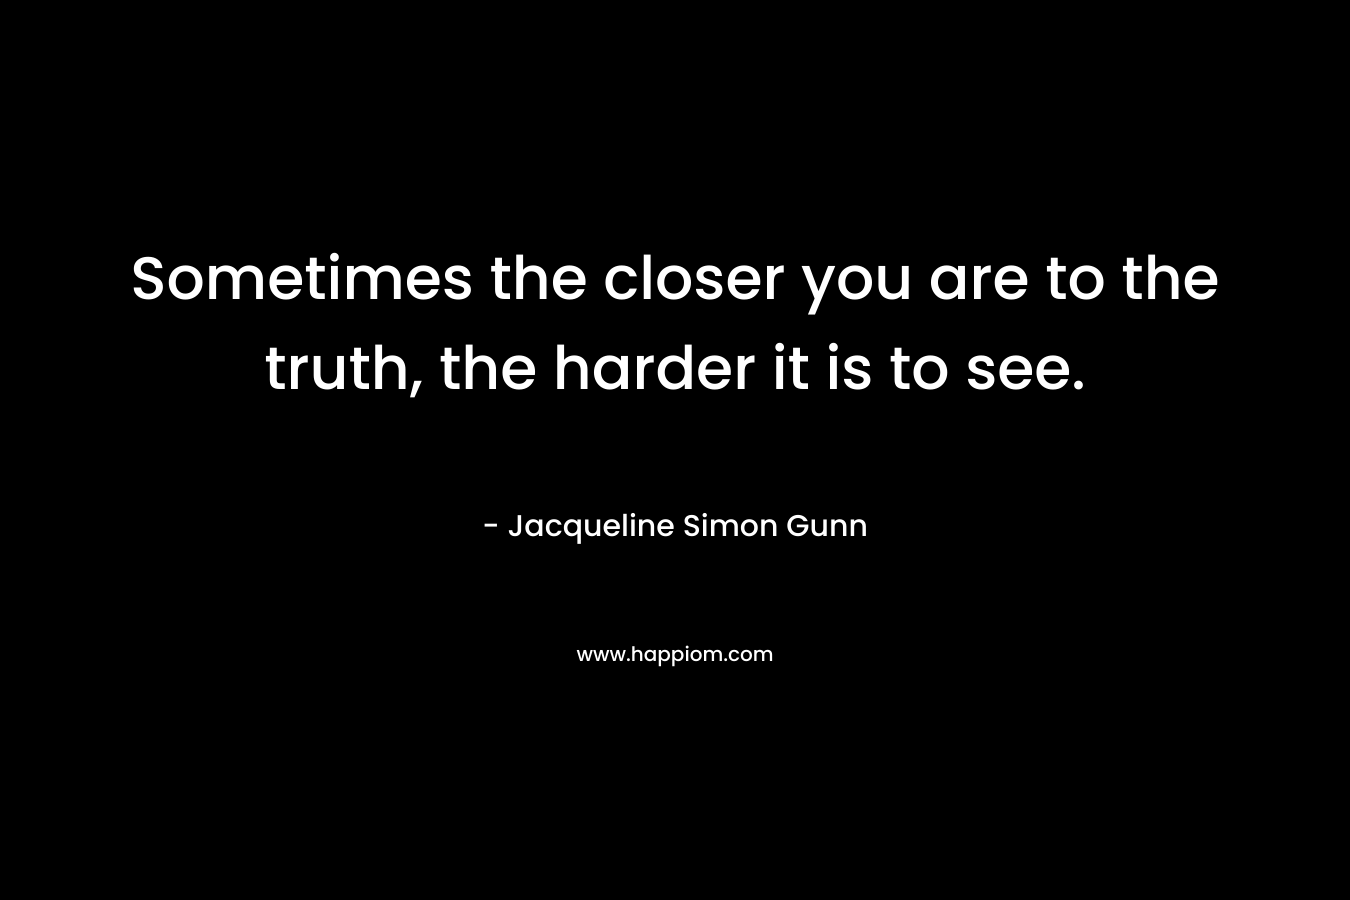 Sometimes the closer you are to the truth, the harder it is to see.